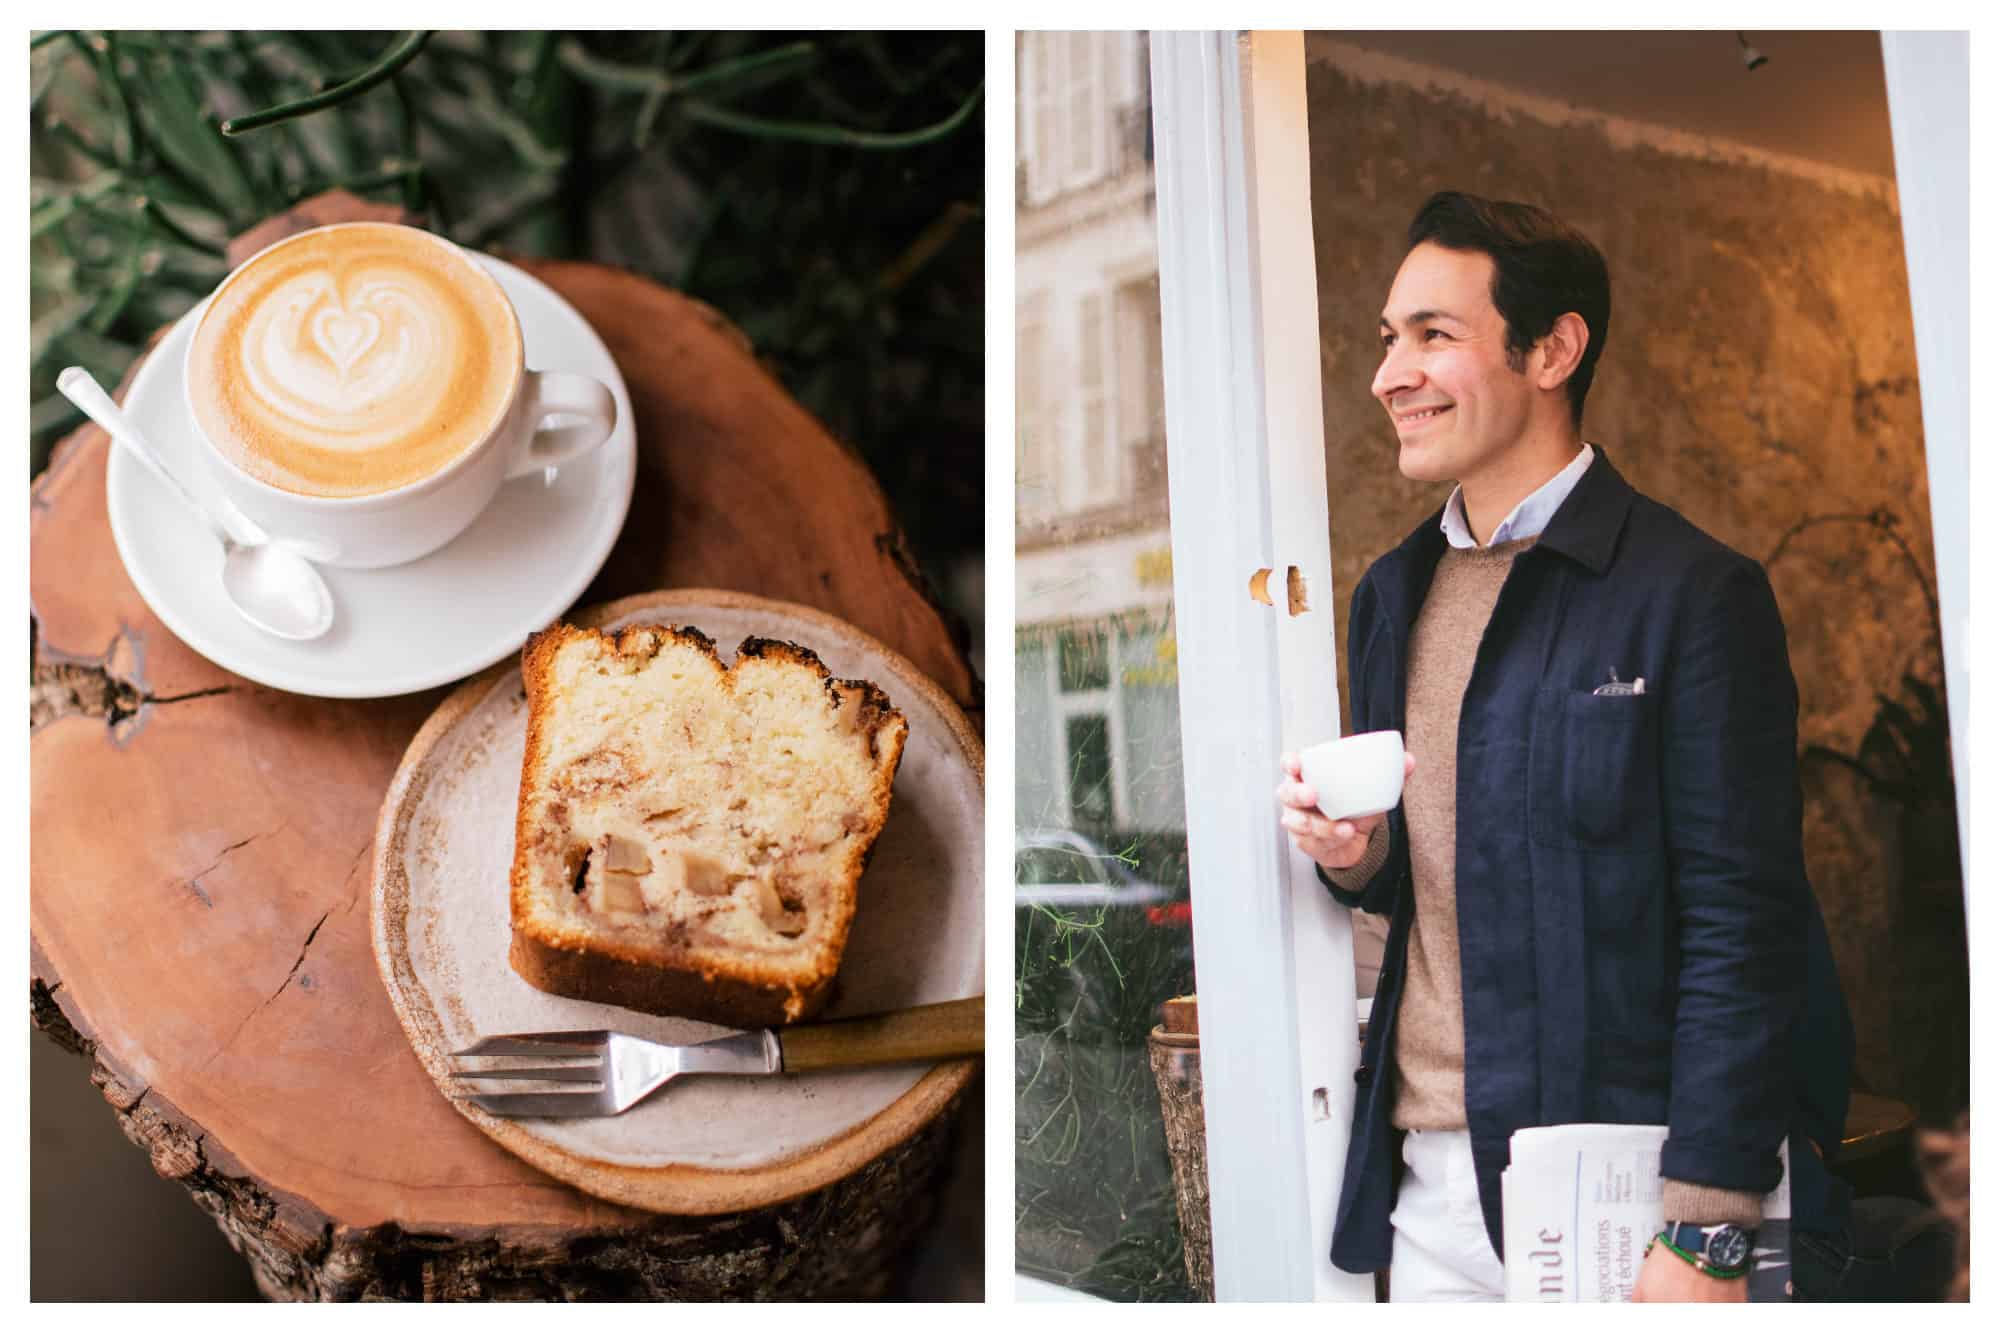 A slice of one of Frank Cakeboy's cakes beside a frothy cappuccino (left). Frank standing in a café doorway smiling with a cup of coffee in hand (right).